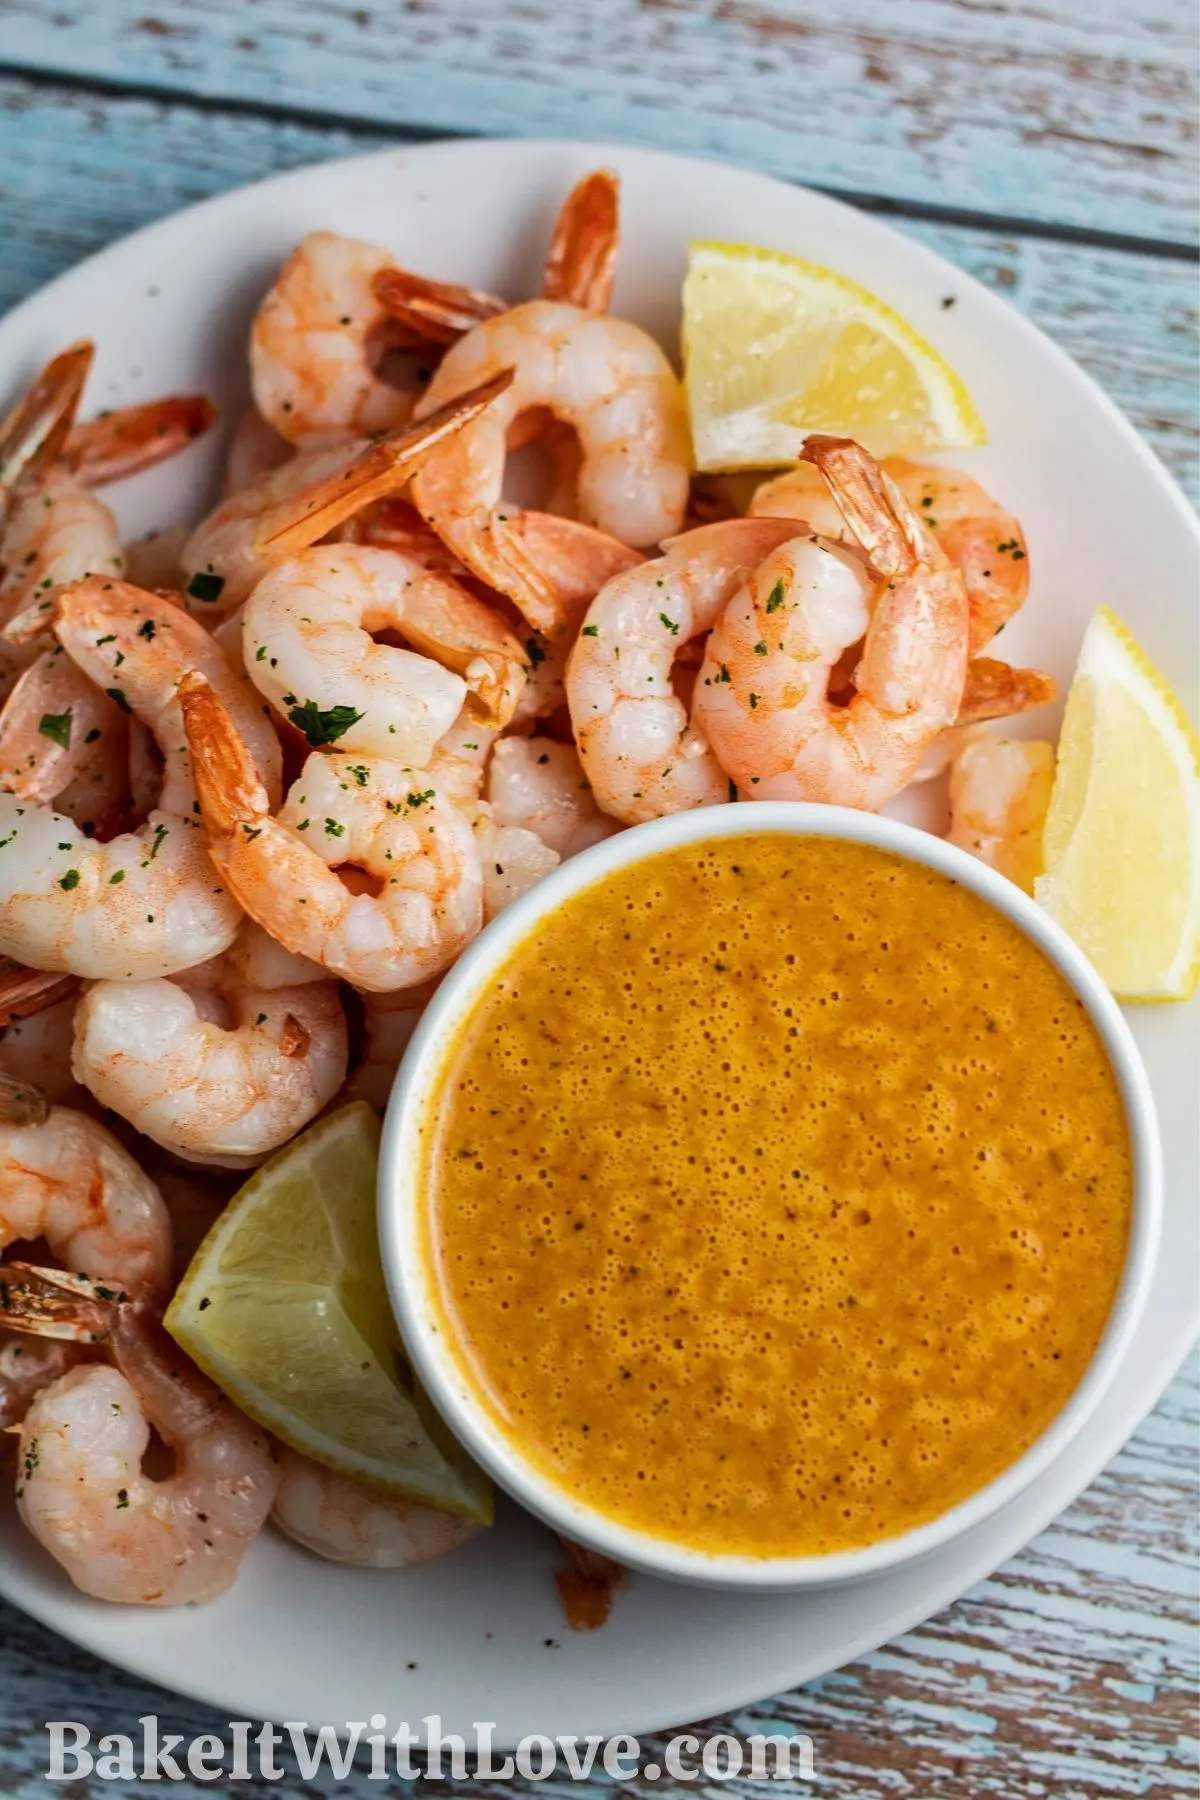 Bloves Sauce Smackalicious in a small bowl with shrimp in the background.